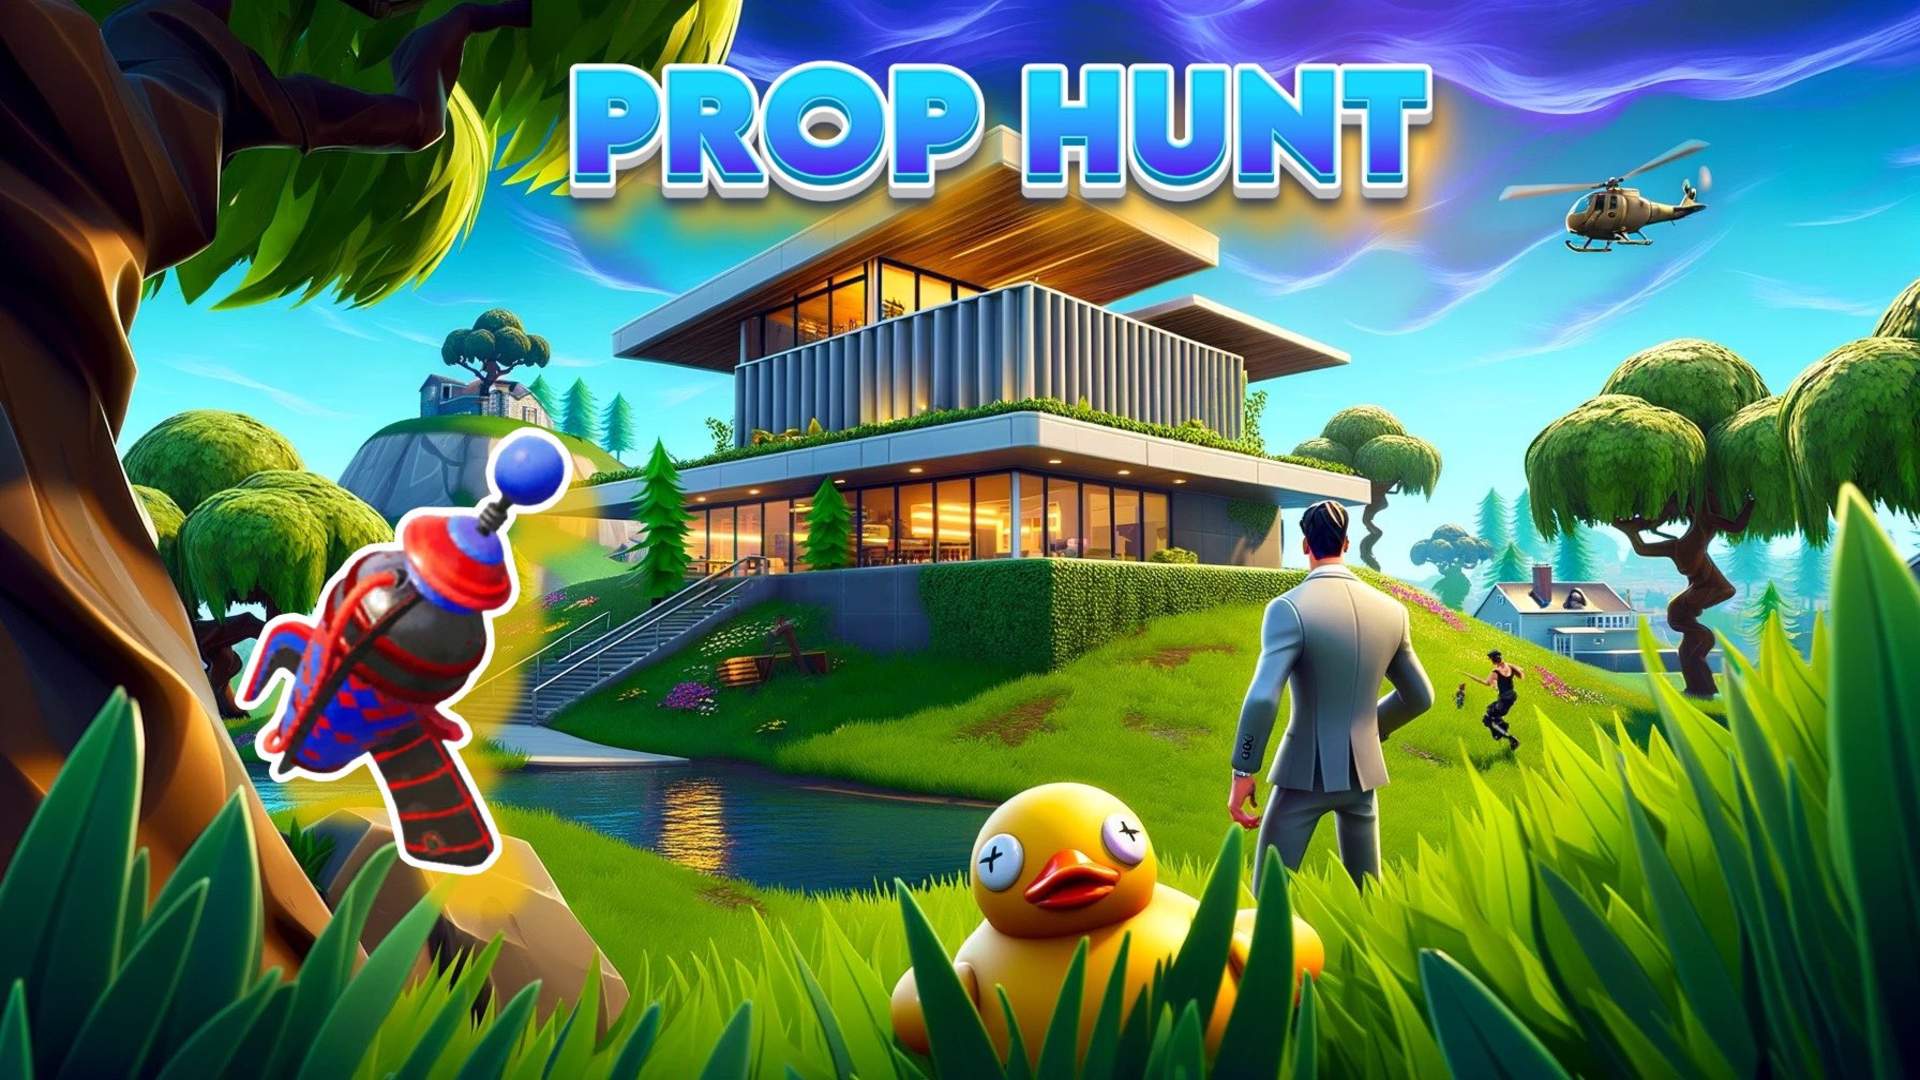 Prop hunt in the Villa of Myths